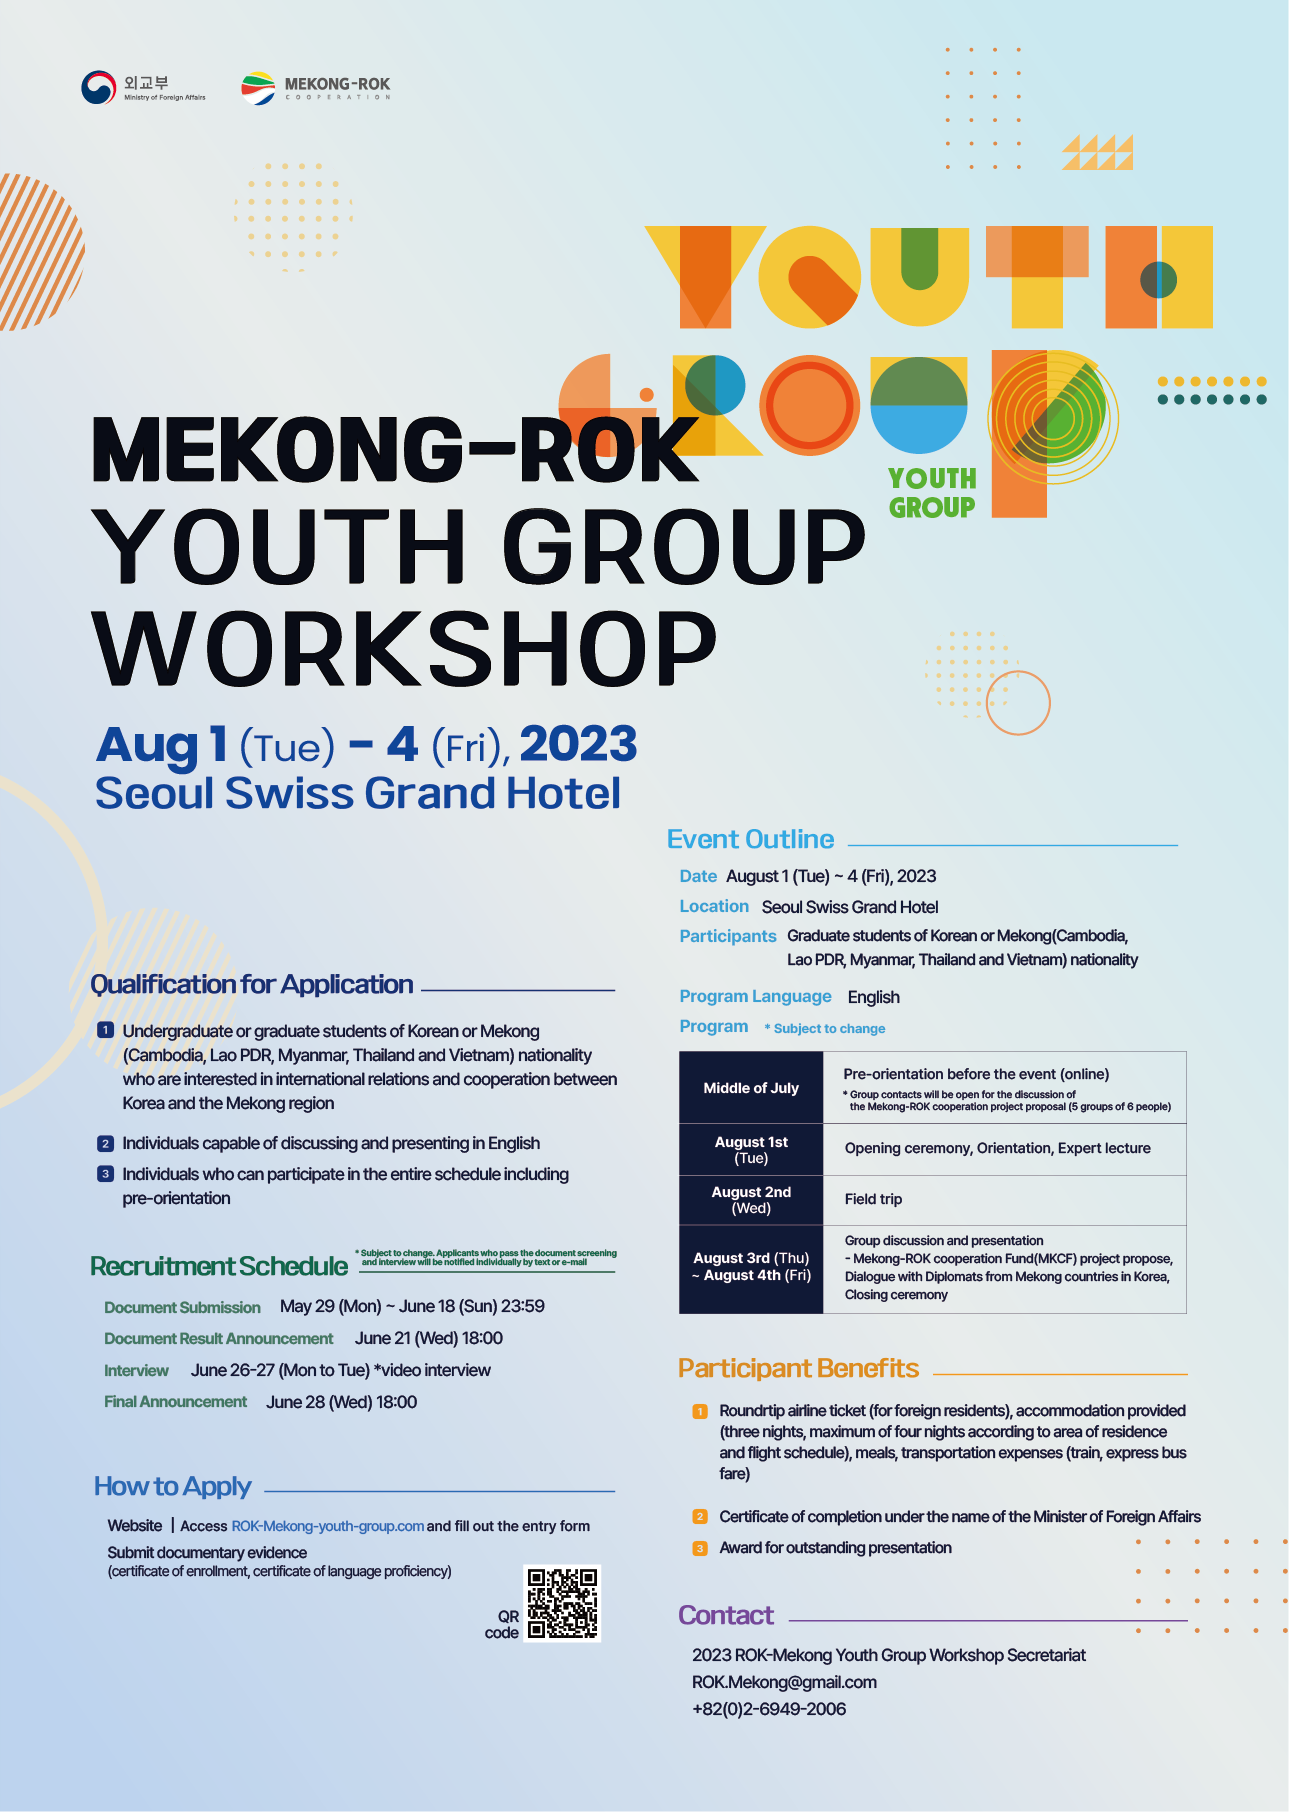 Recruitment of Participants for MEKONG-ROK Youth Group Workshop